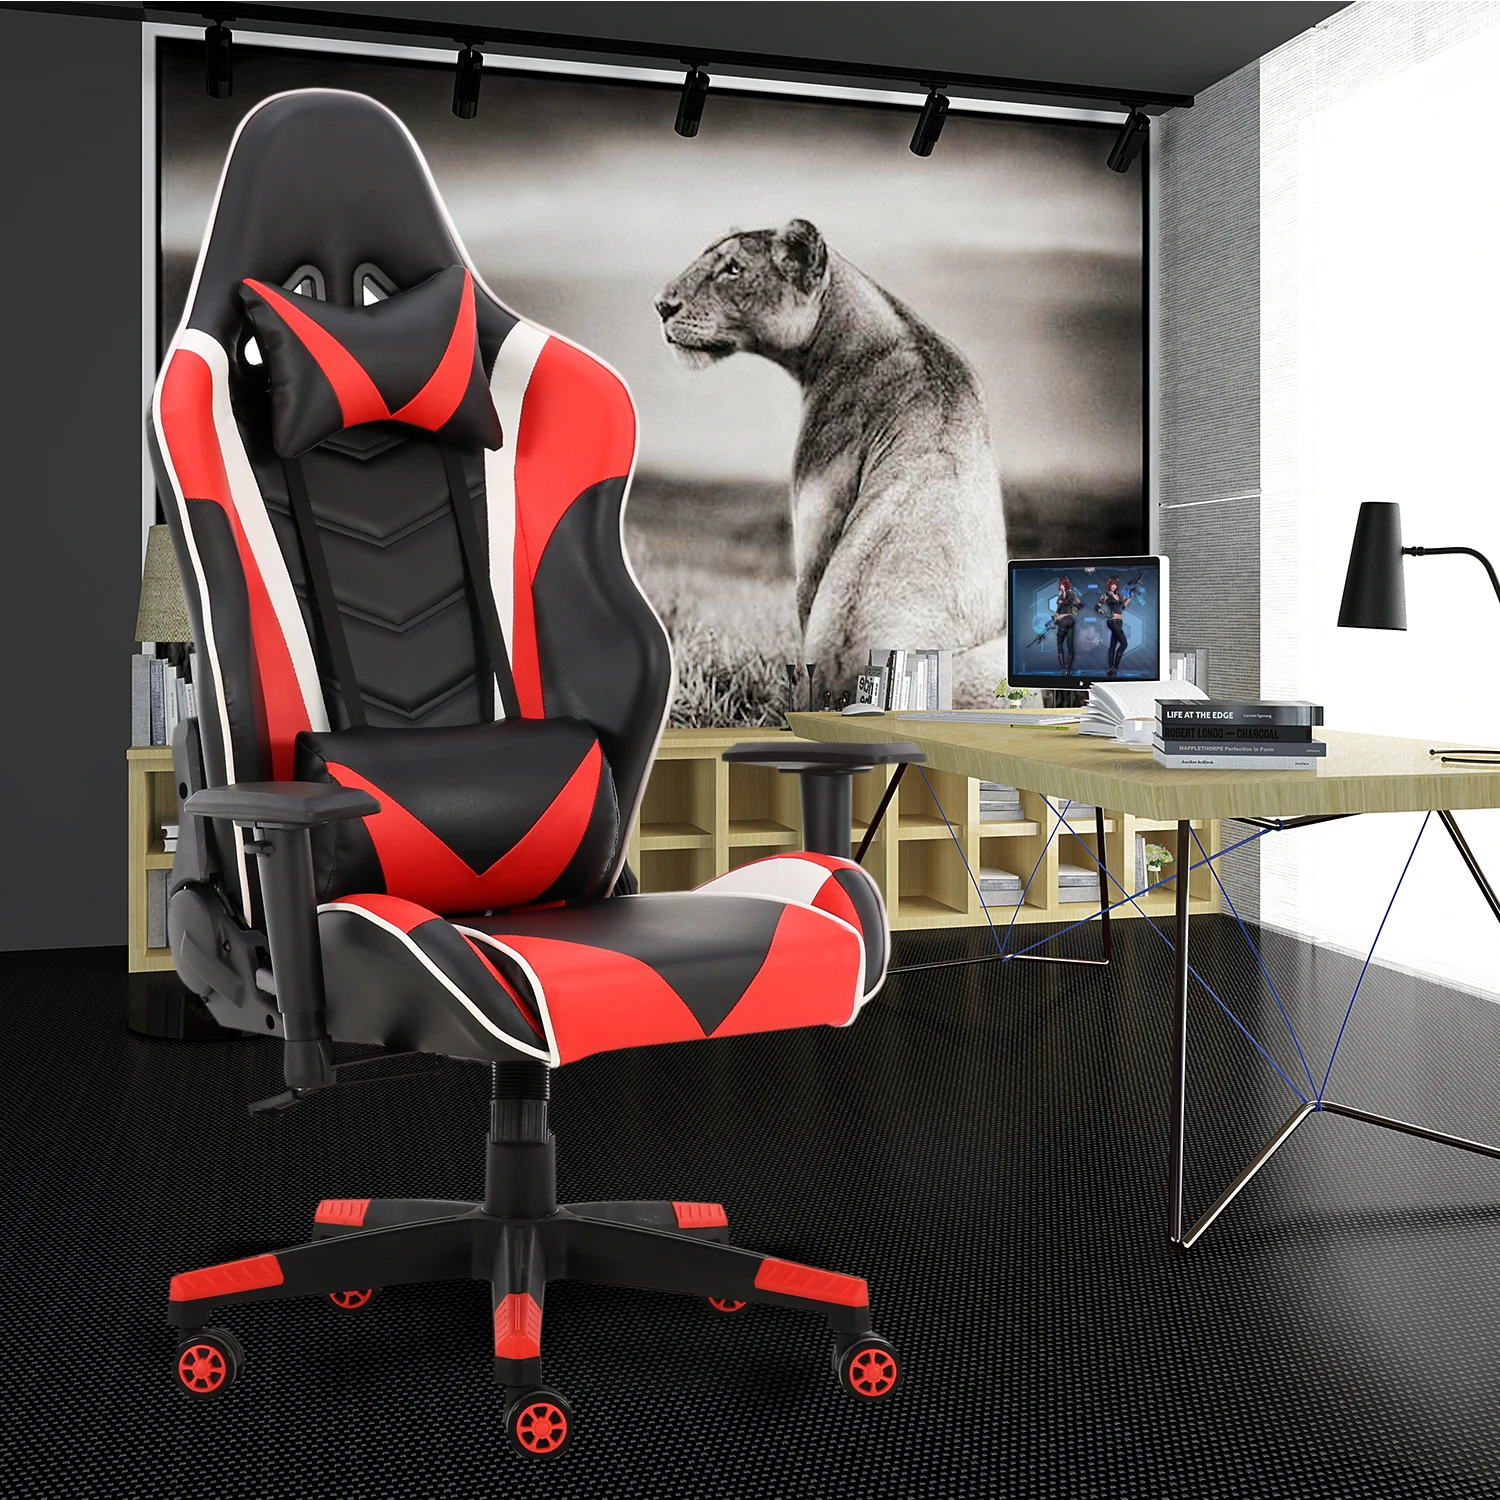 

Computer Desk Chair Gaming Chairs Office Swivel Chairs with headrest and Lumbar Pillow Red US Warehouse